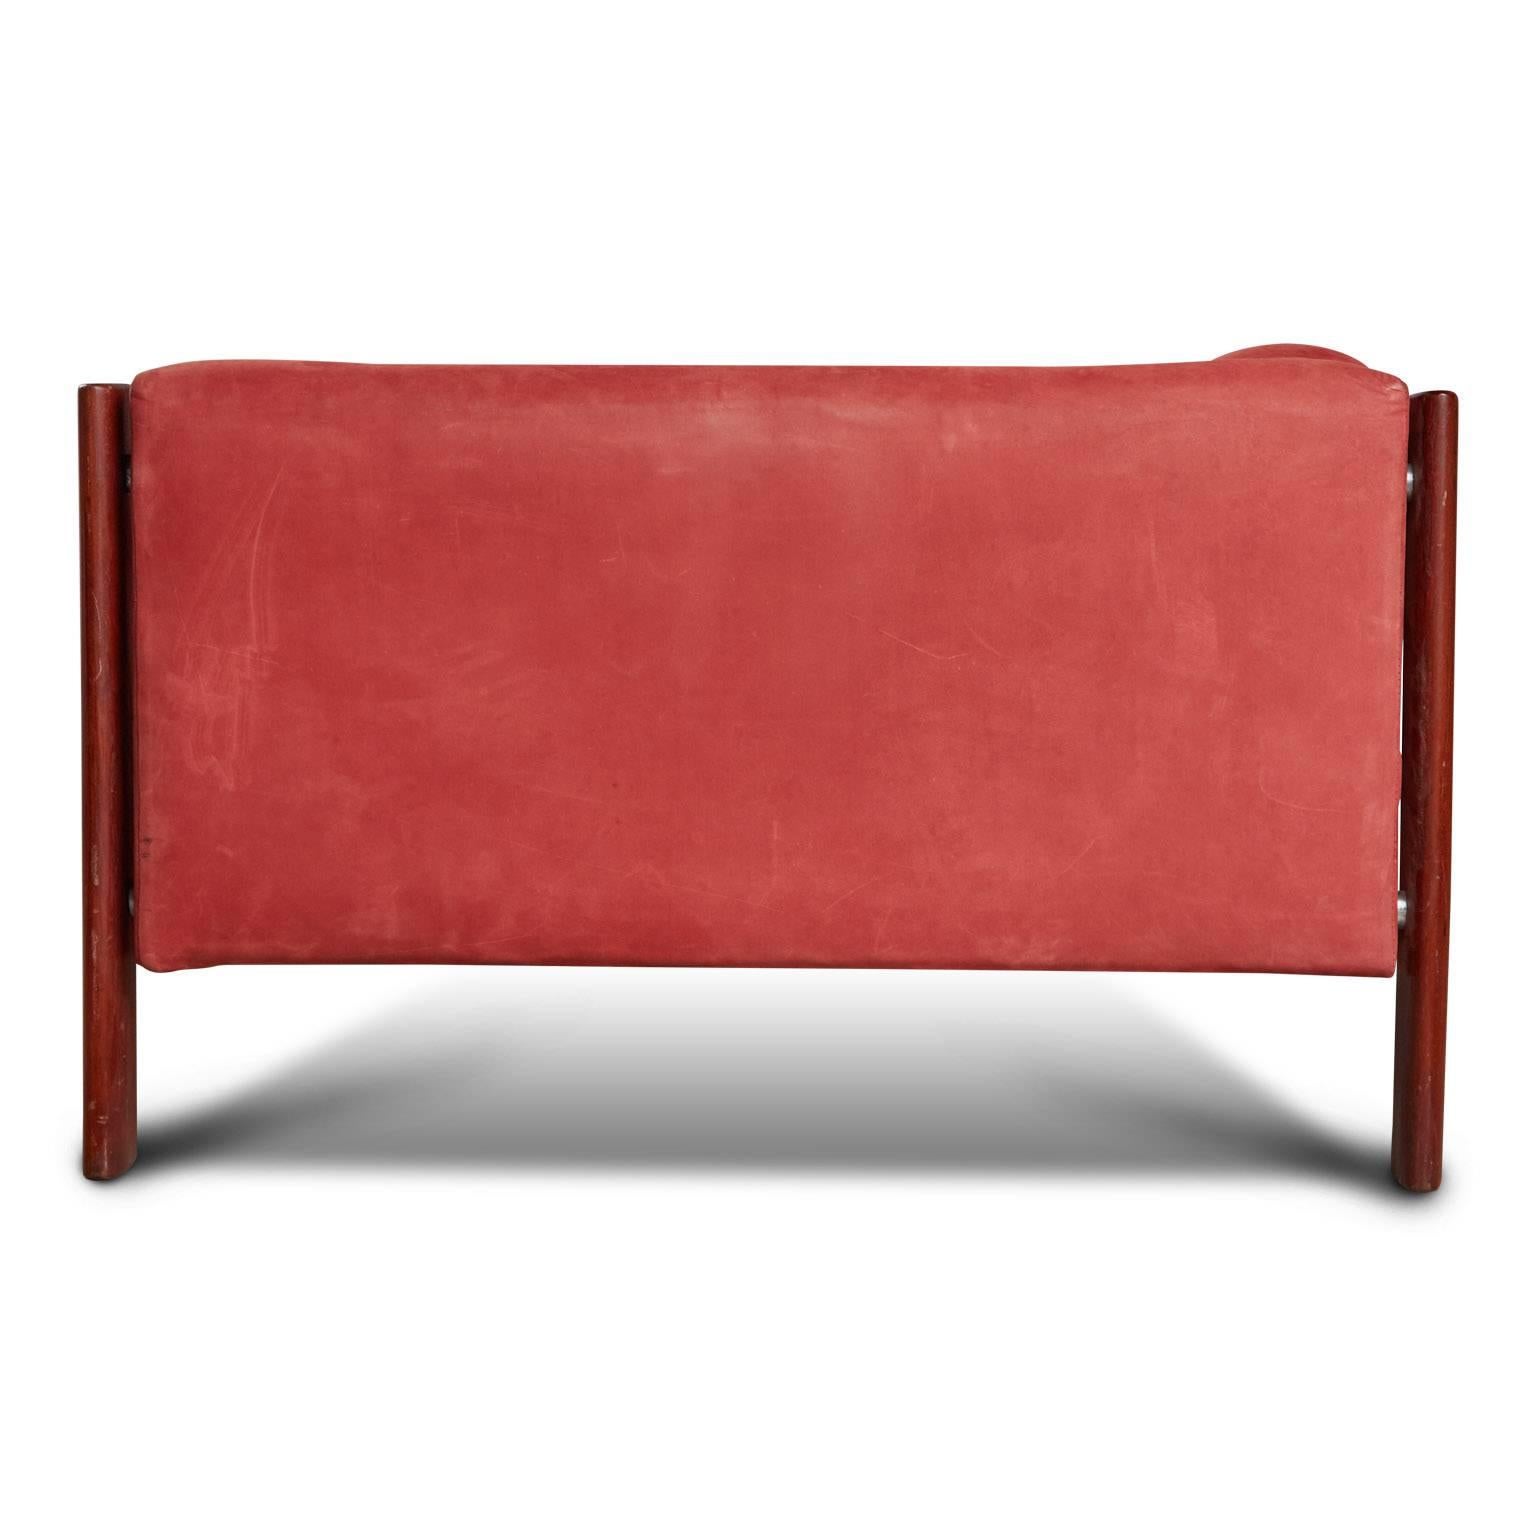 Mid-20th Century Brazilian Rosewood and Suede Sofa, circa 1960